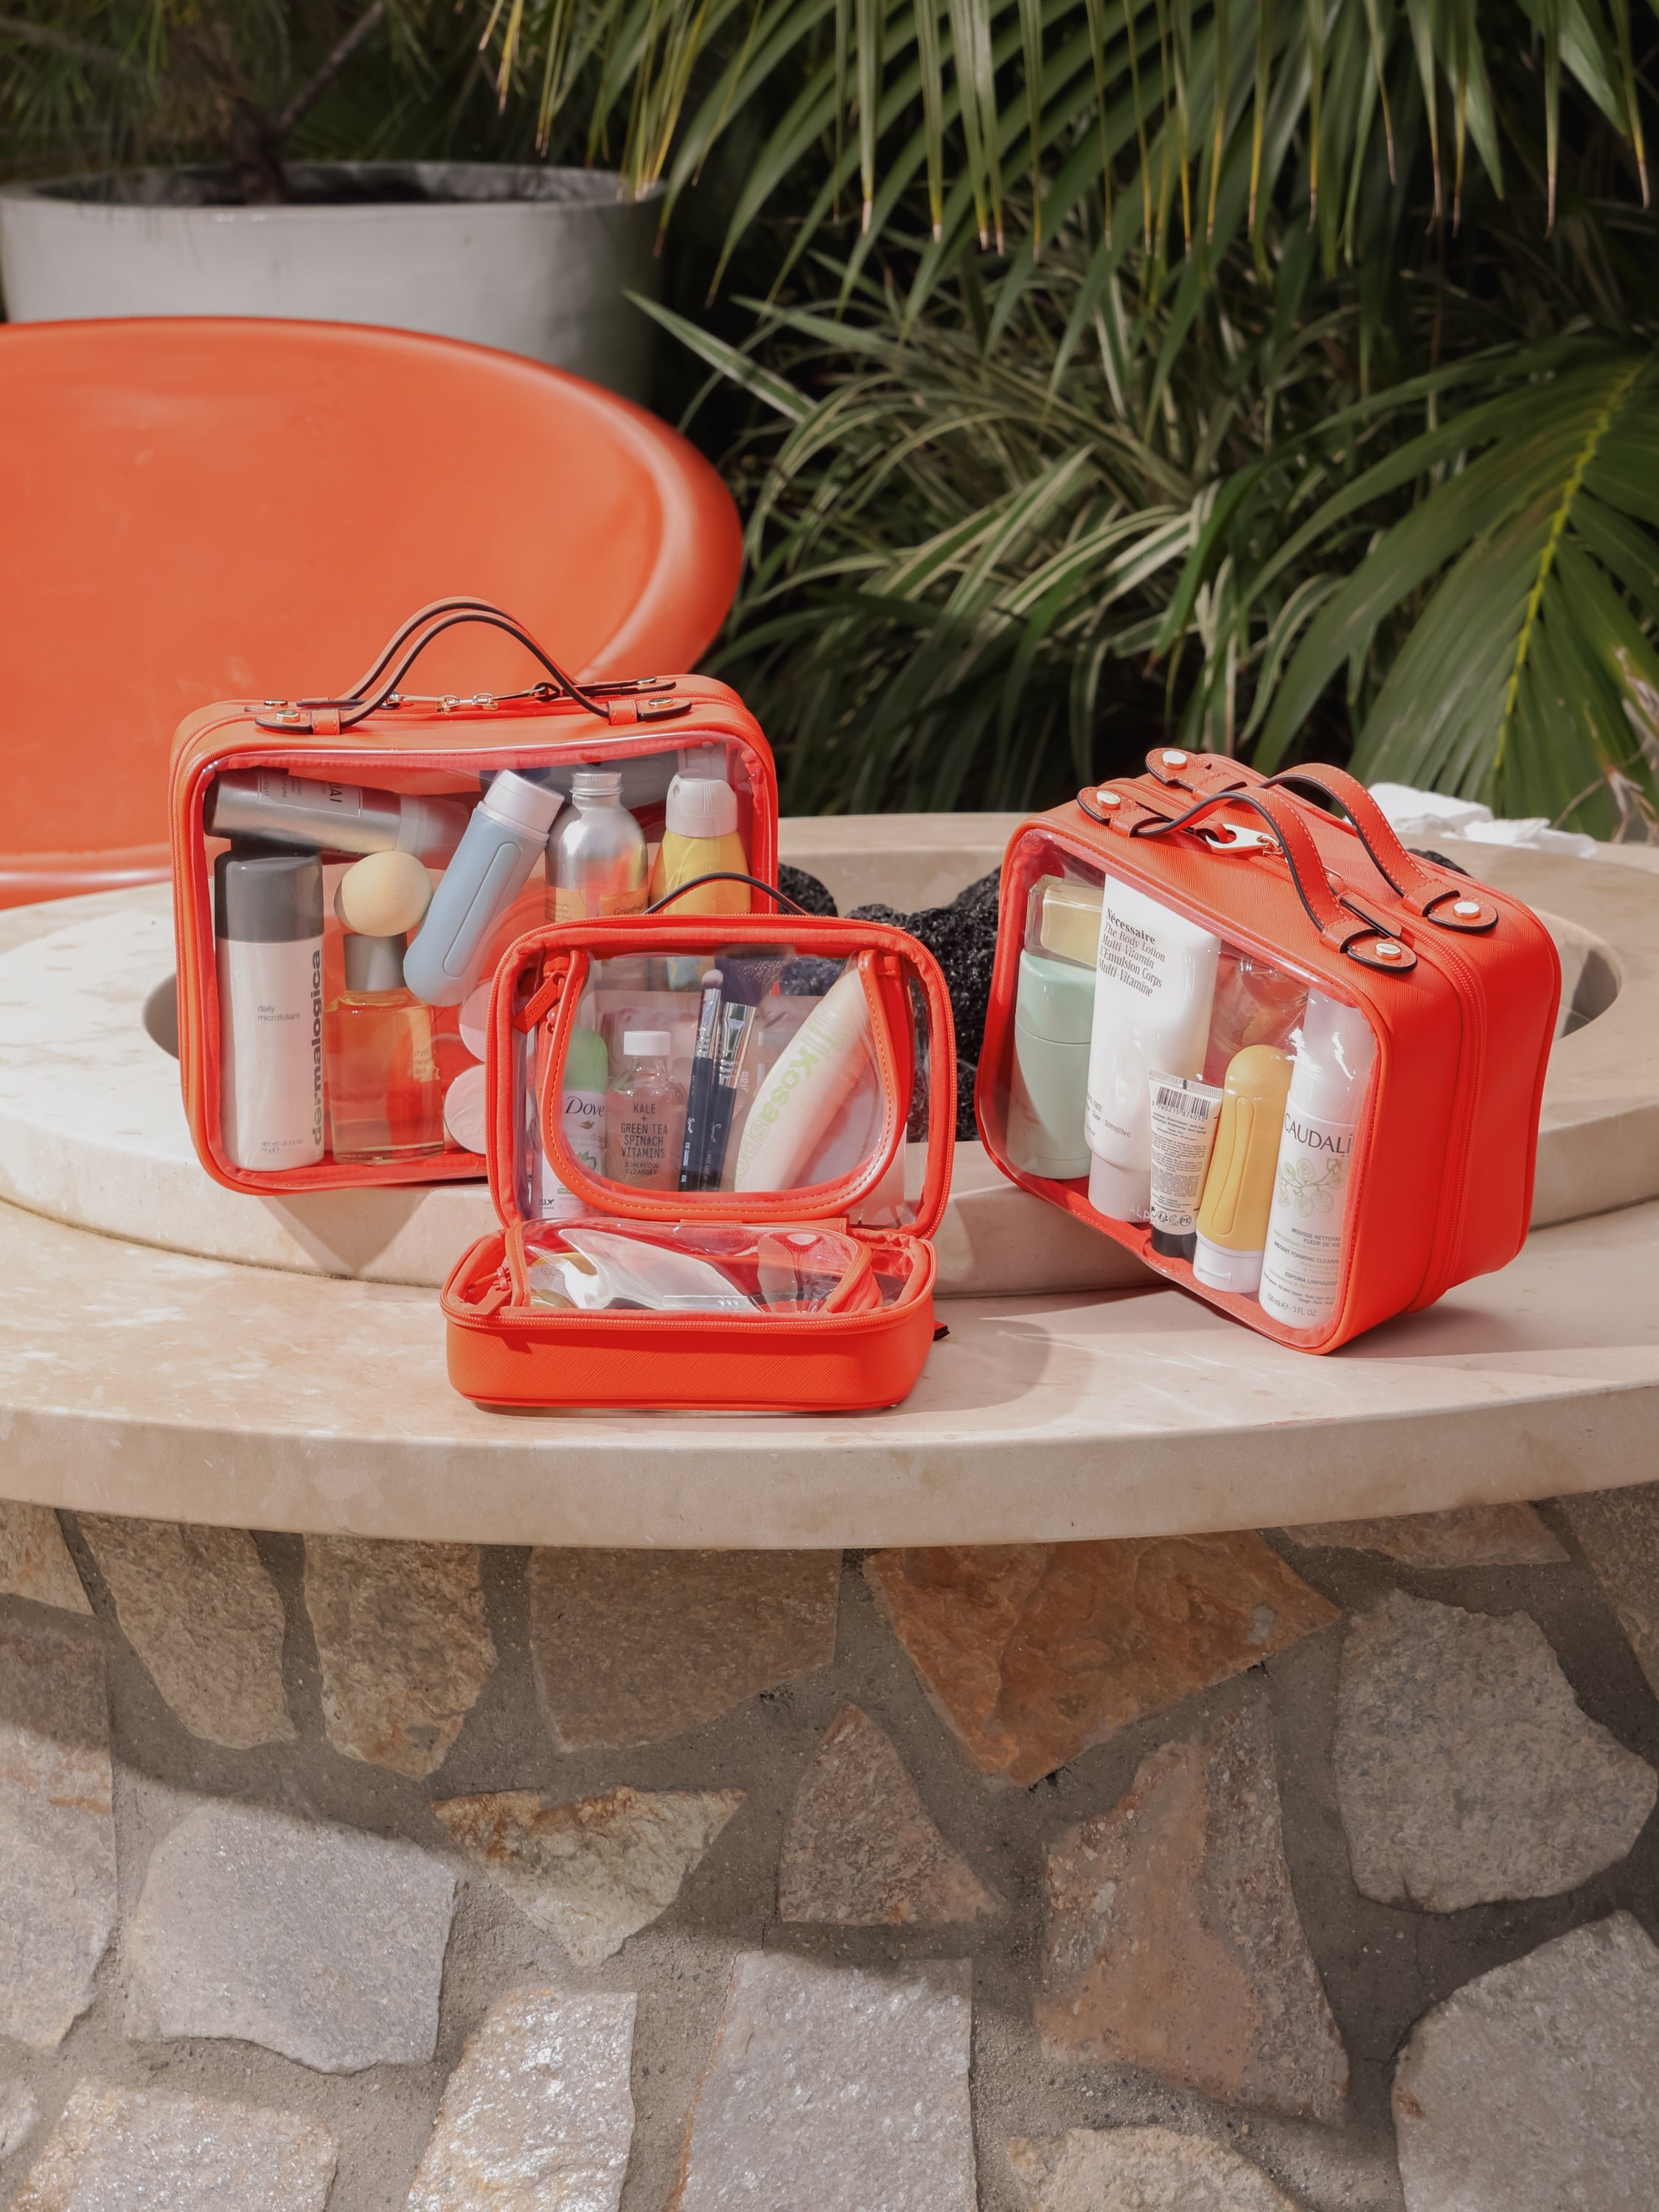 CALPAK clear makeup cases with zippered compartments in small, medium and large sizes in orange